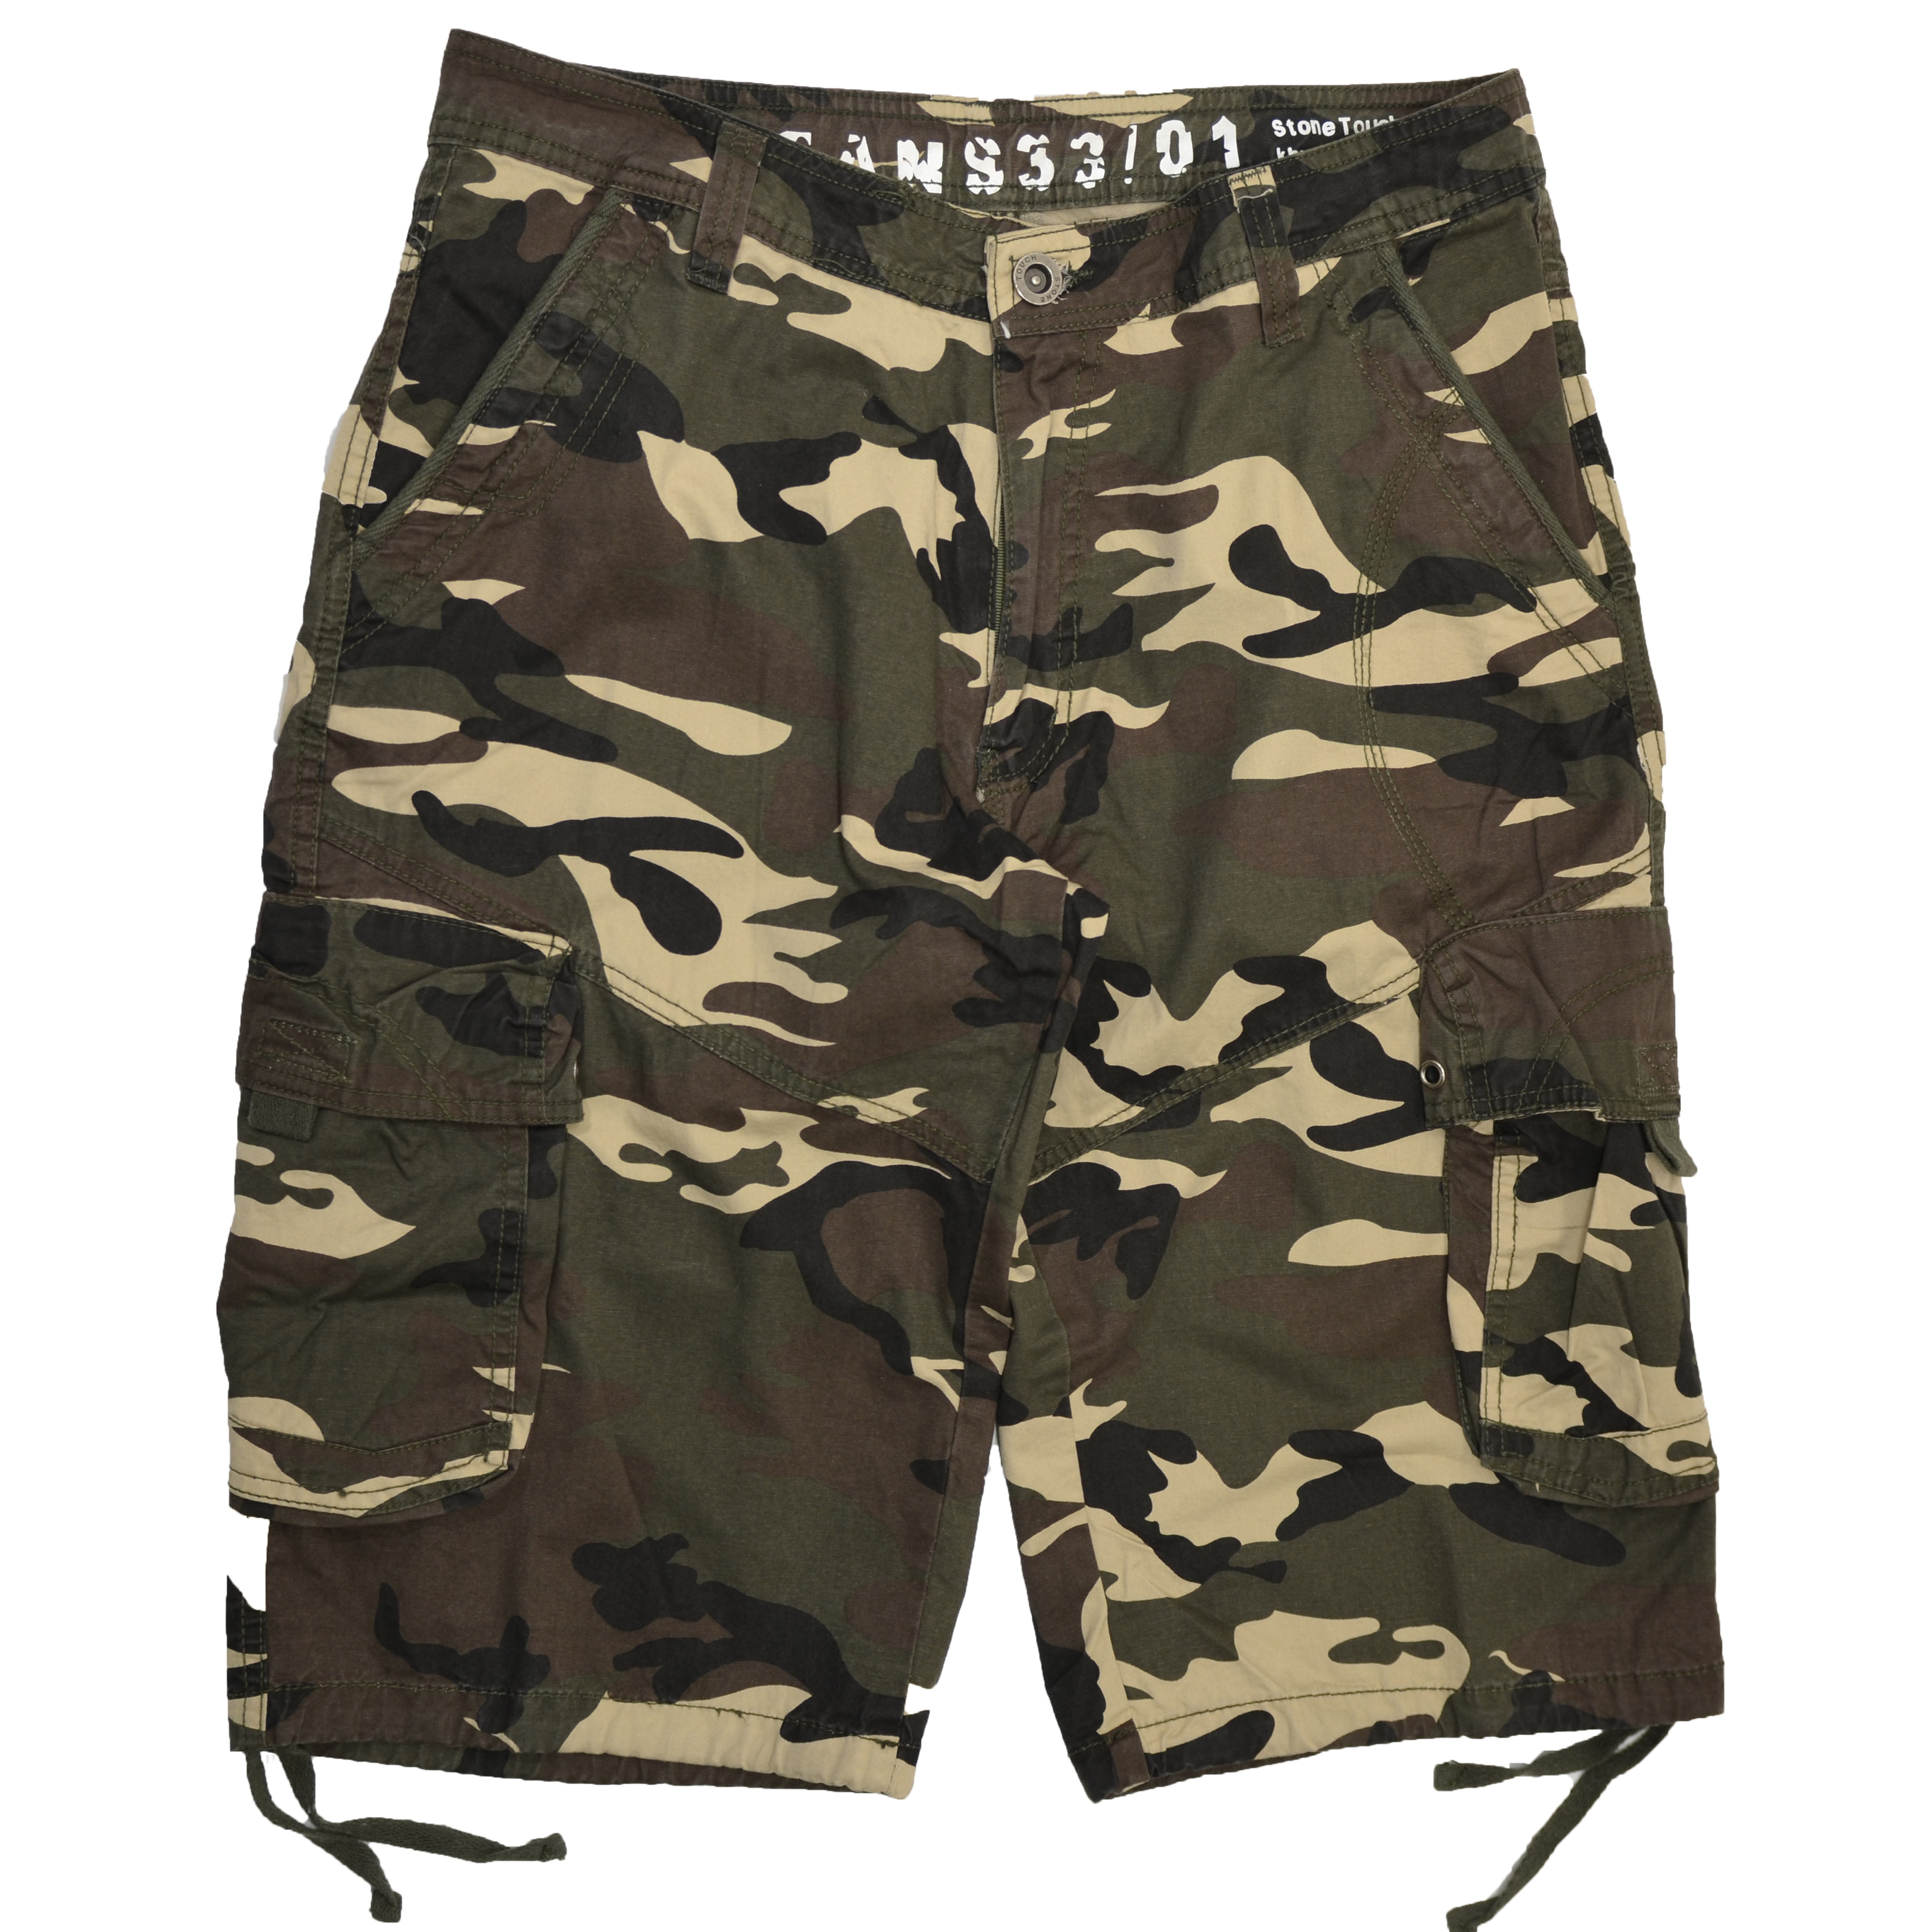 Details about   MENS STONEWASH CAMO CARGO SHORTS Gents 100% Cotton Grey Military Tundra combats 